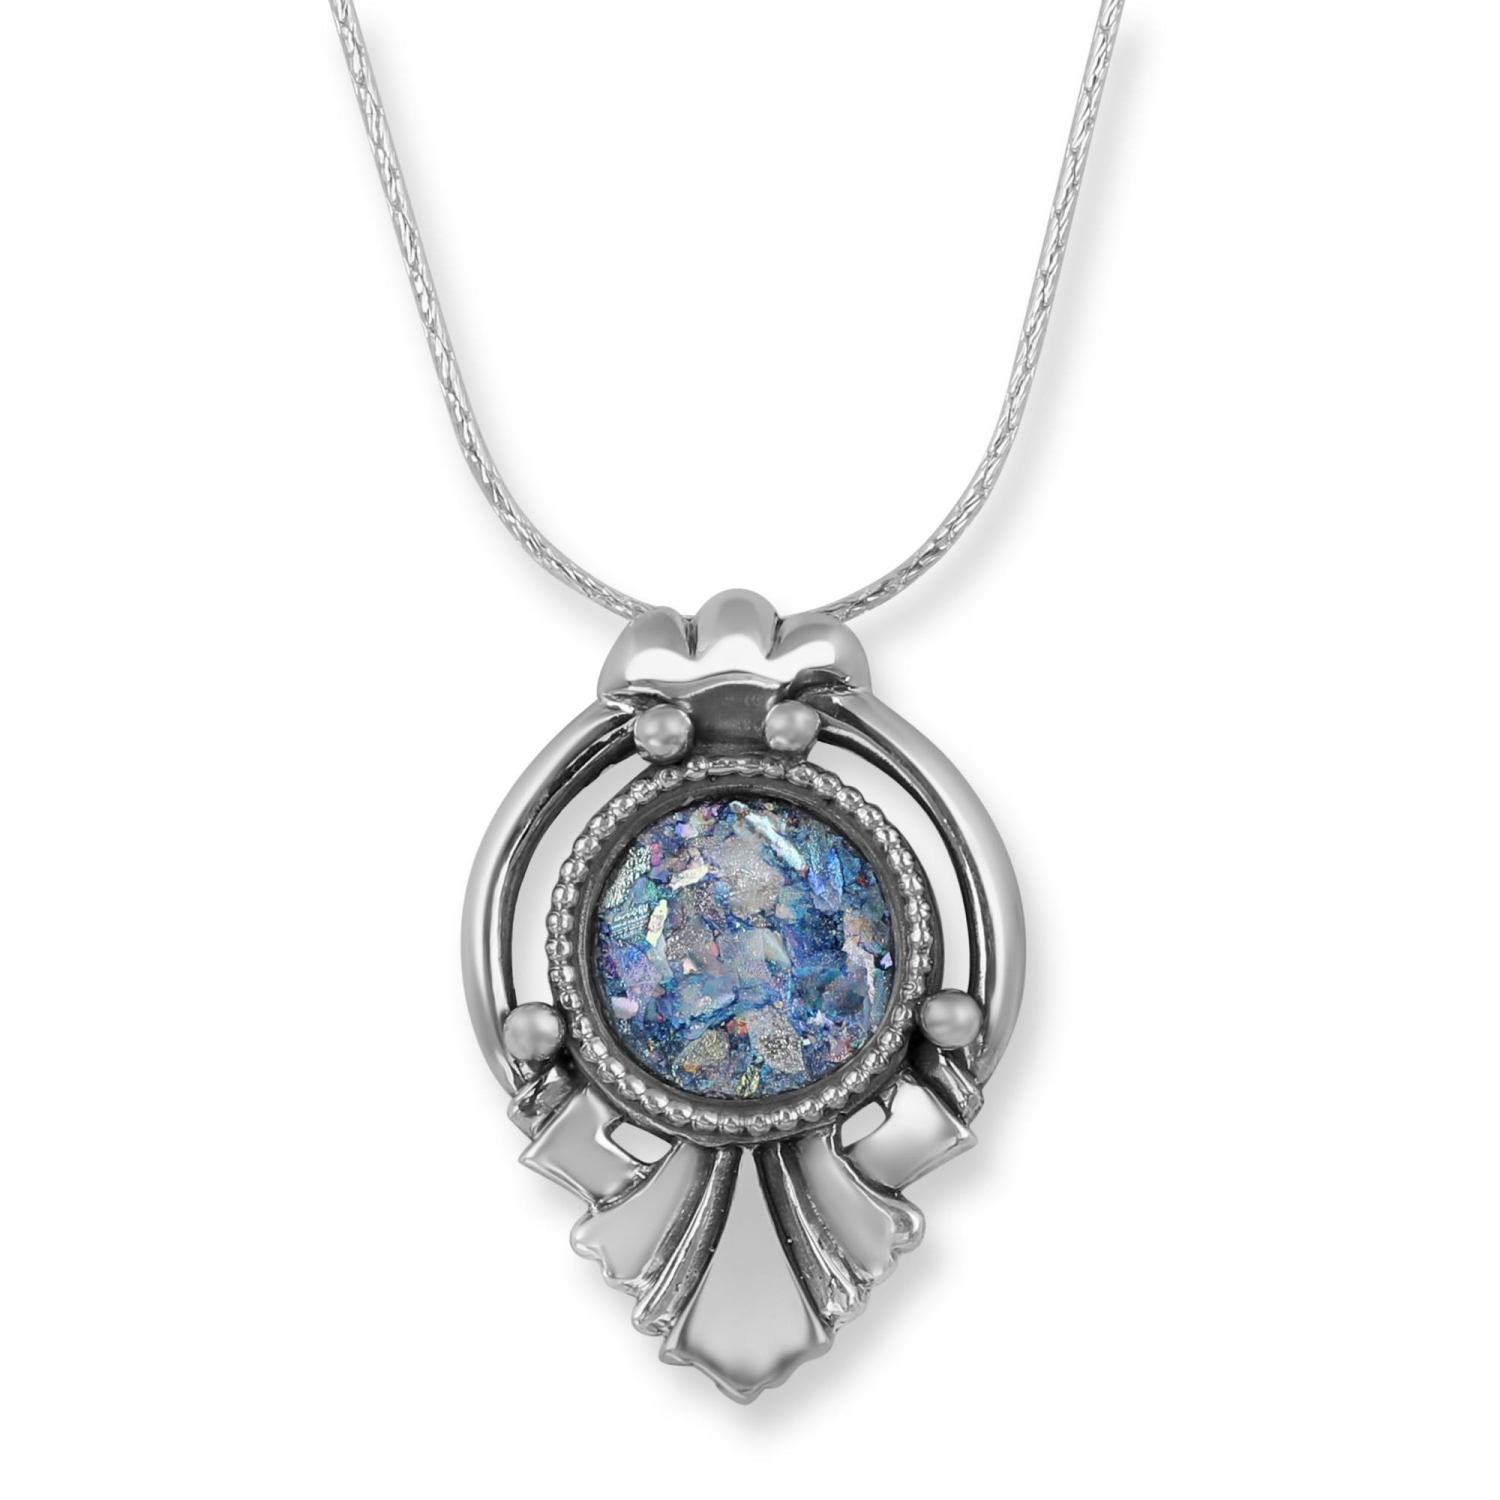 Sterling Silver and Roman Glass Abstract Inverted Pomegranate Necklace  - 1